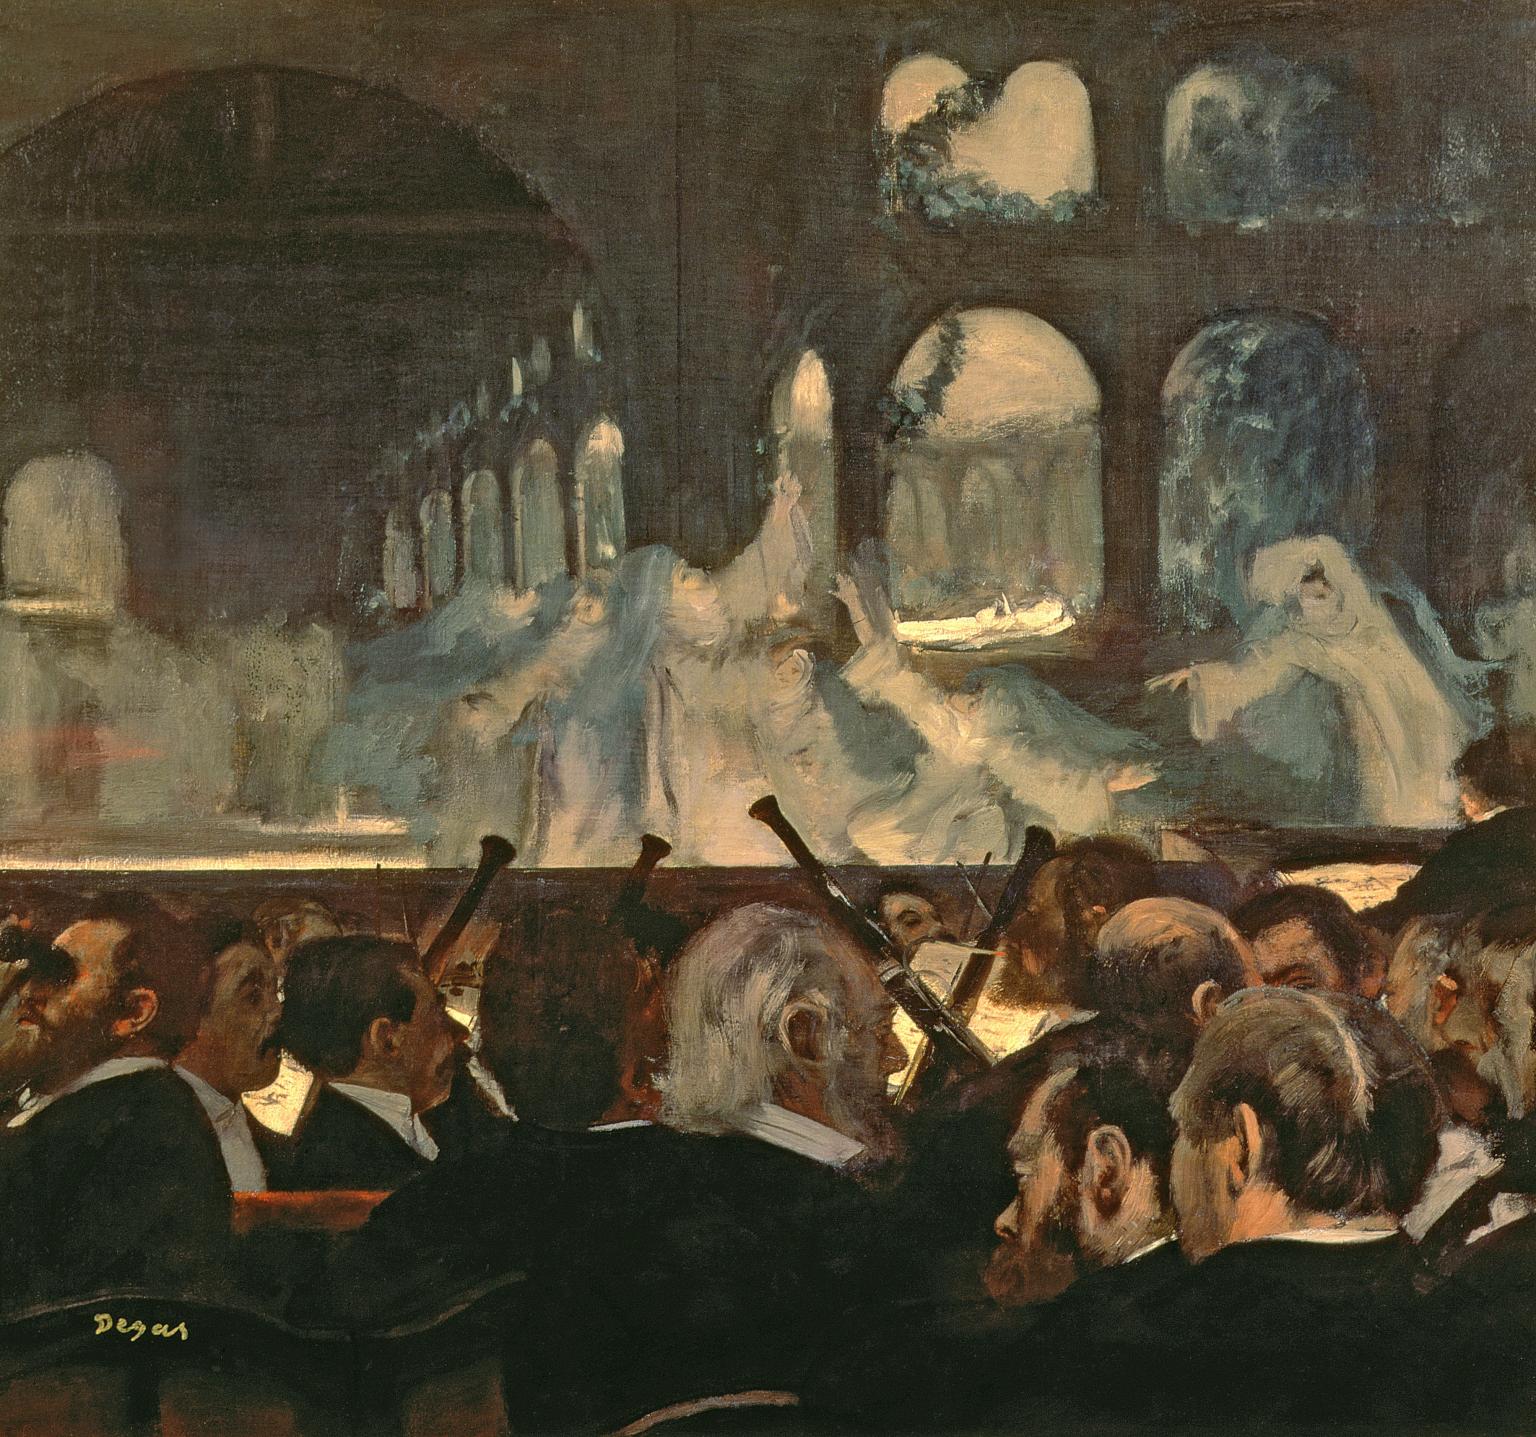 Painting of audience and orchestra facing stage with shadowy figures on it.